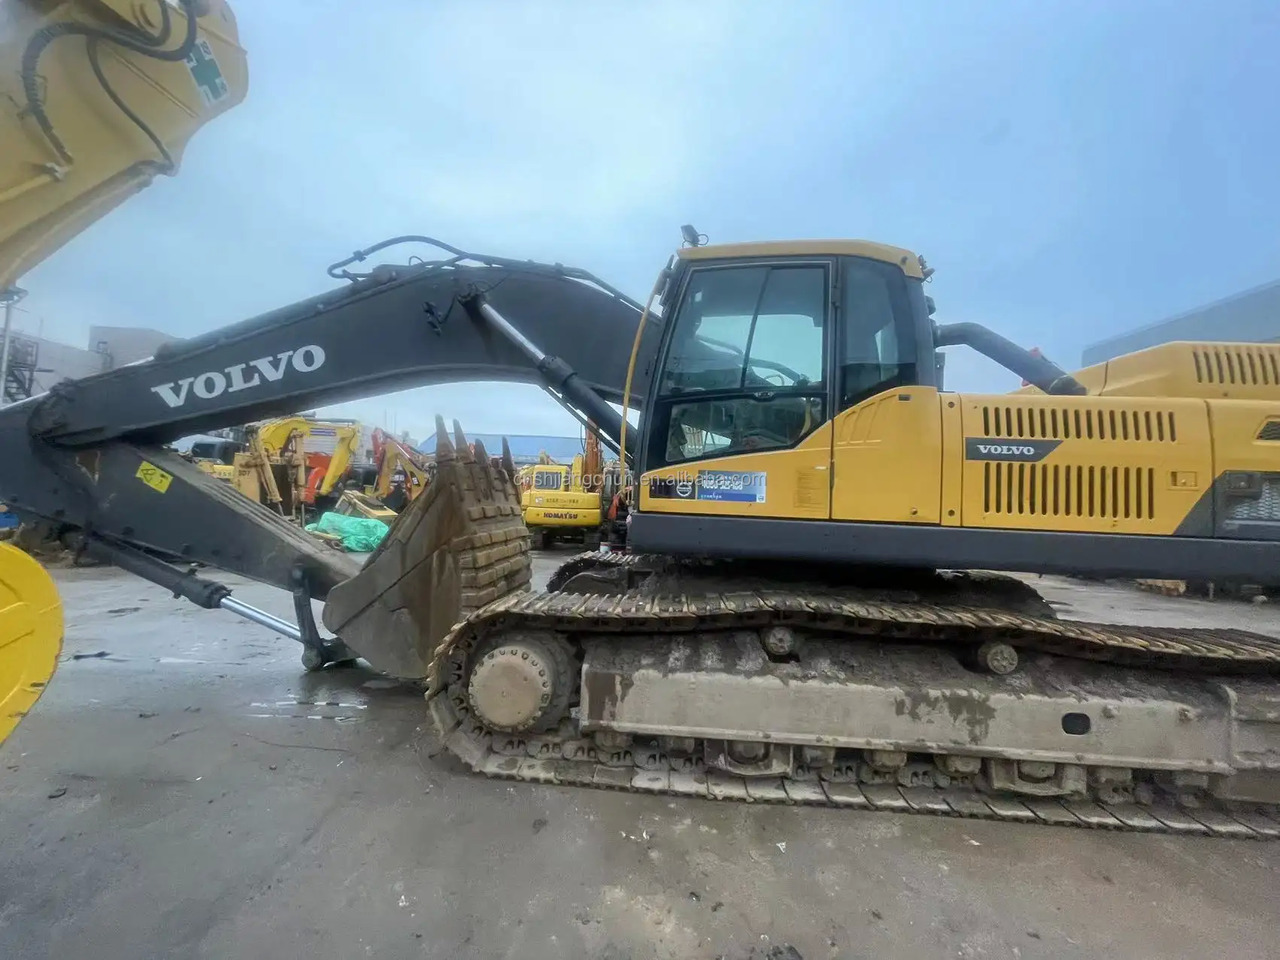 Ekskavator perayap New arrival second hand  hot selling Excavator construction machinery parts used excavator used  Volvo EC480D  in stock for sale: gambar 3